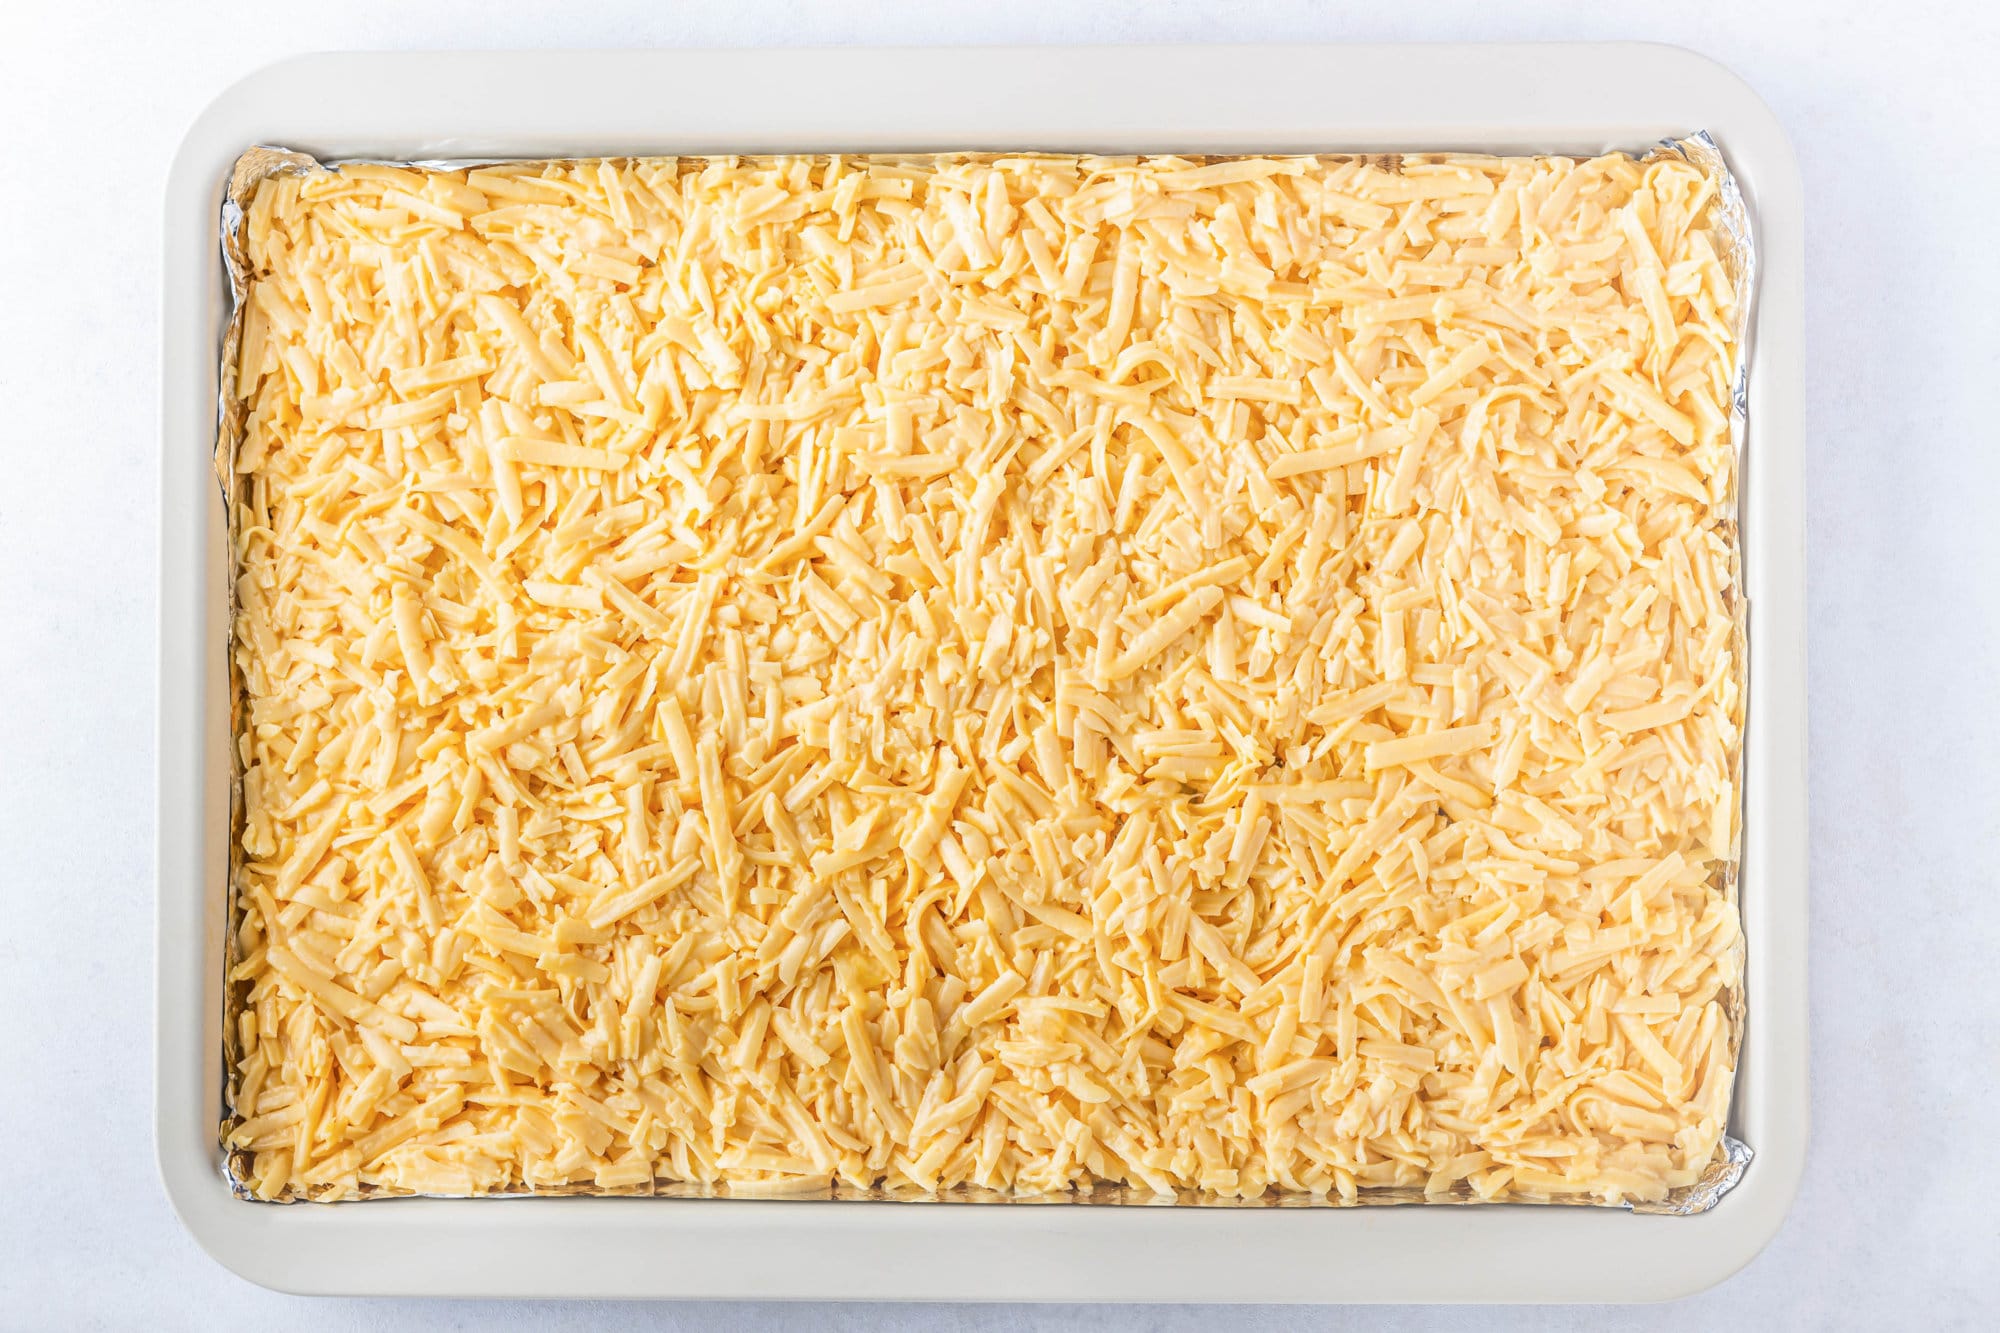 Shredded cheese laid out on a baking sheet.